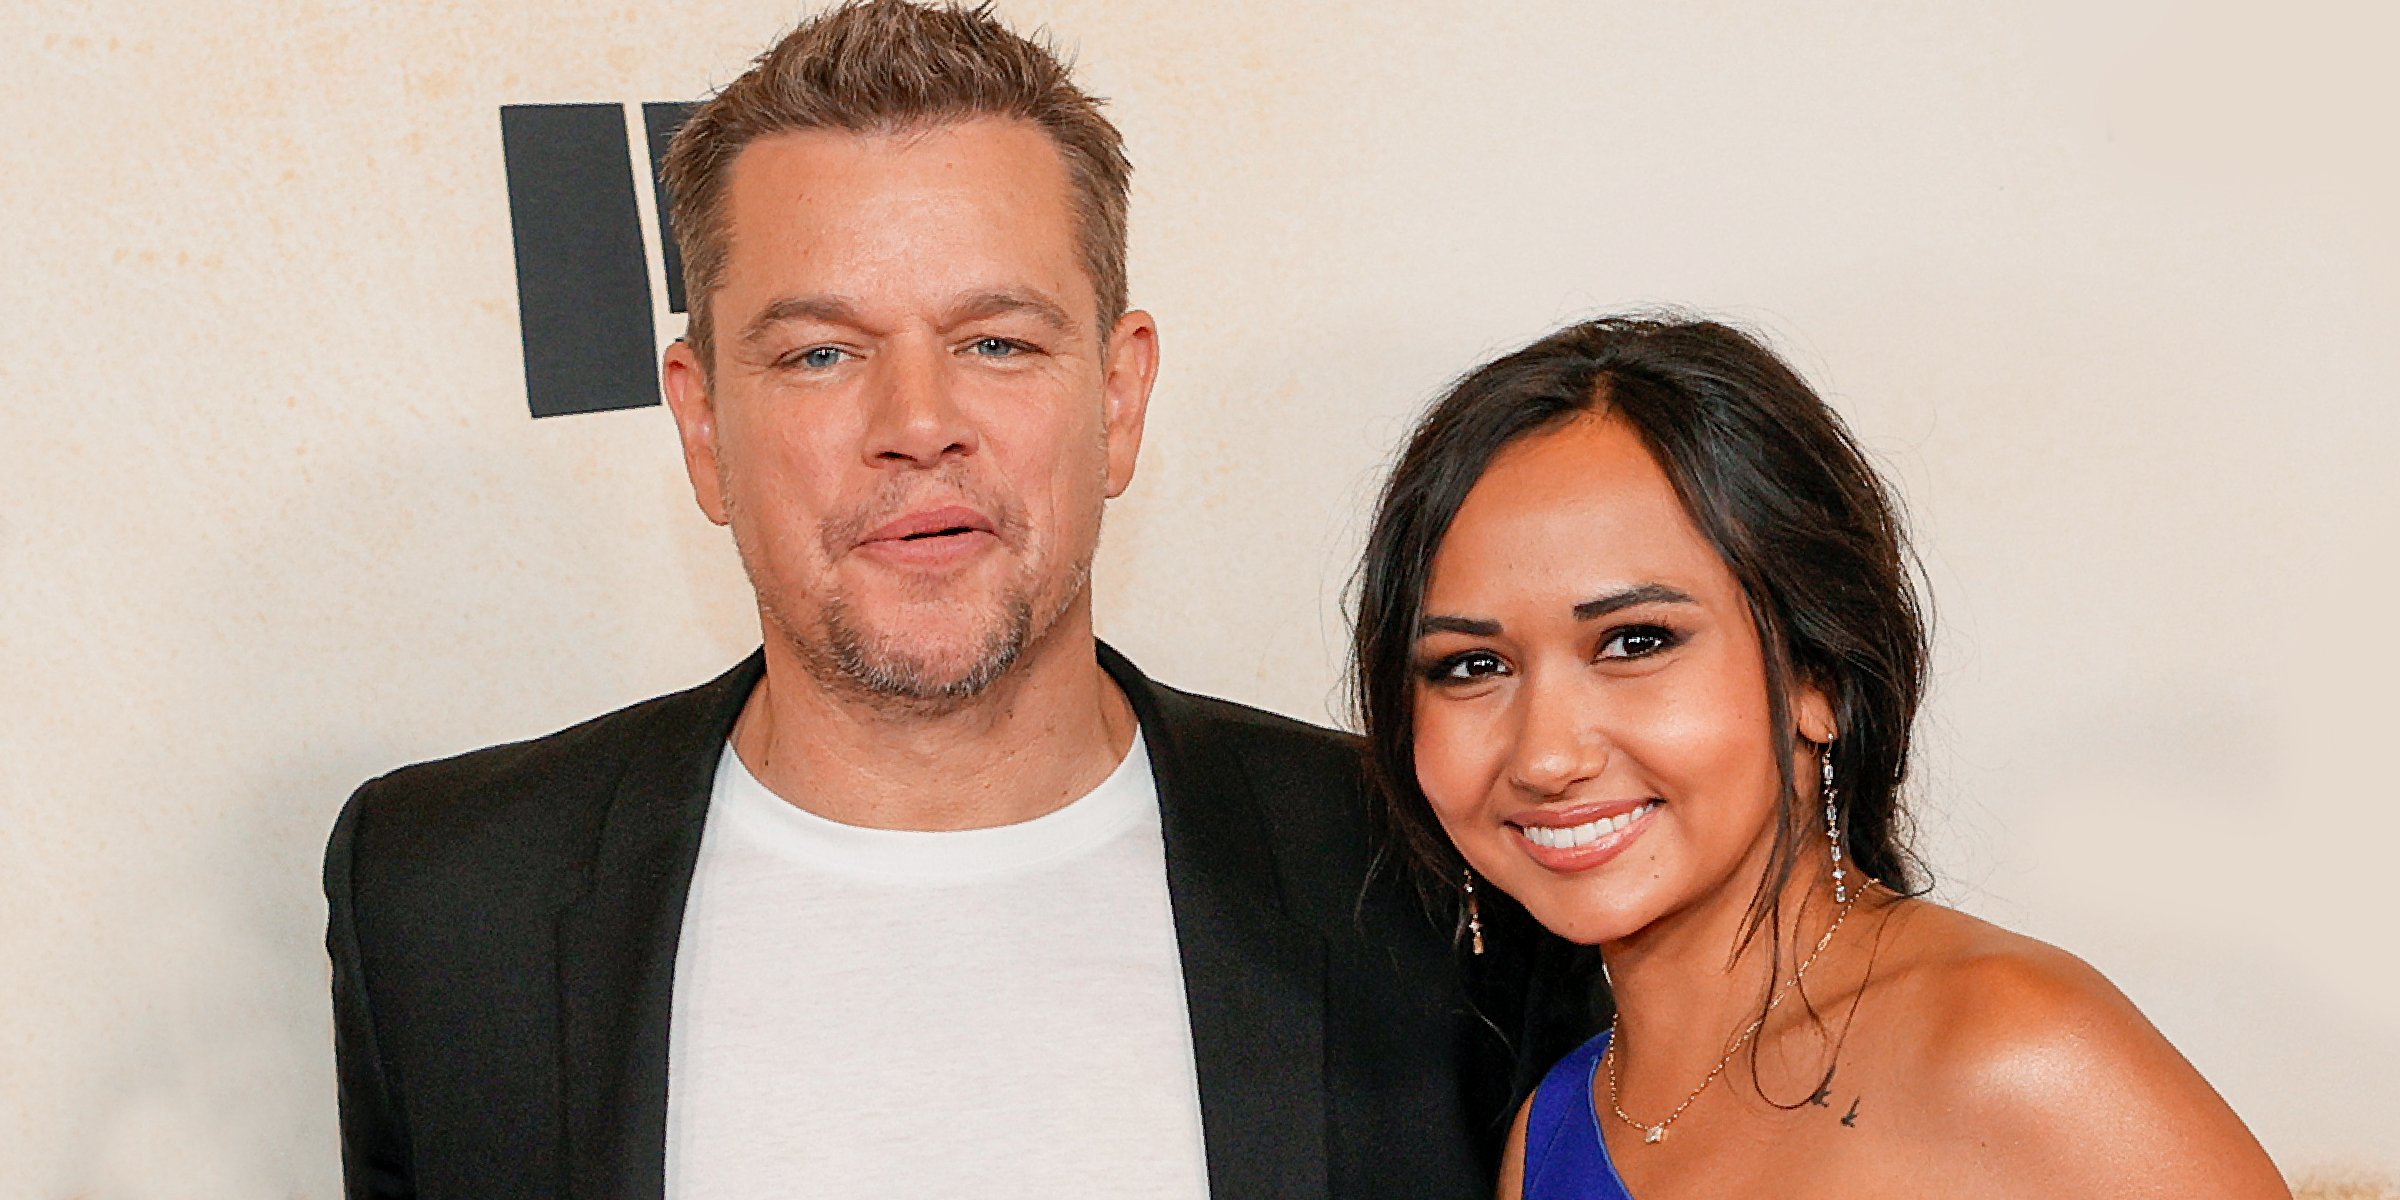 Matt Damon and Alexia Barosso. | Source: Getty Images